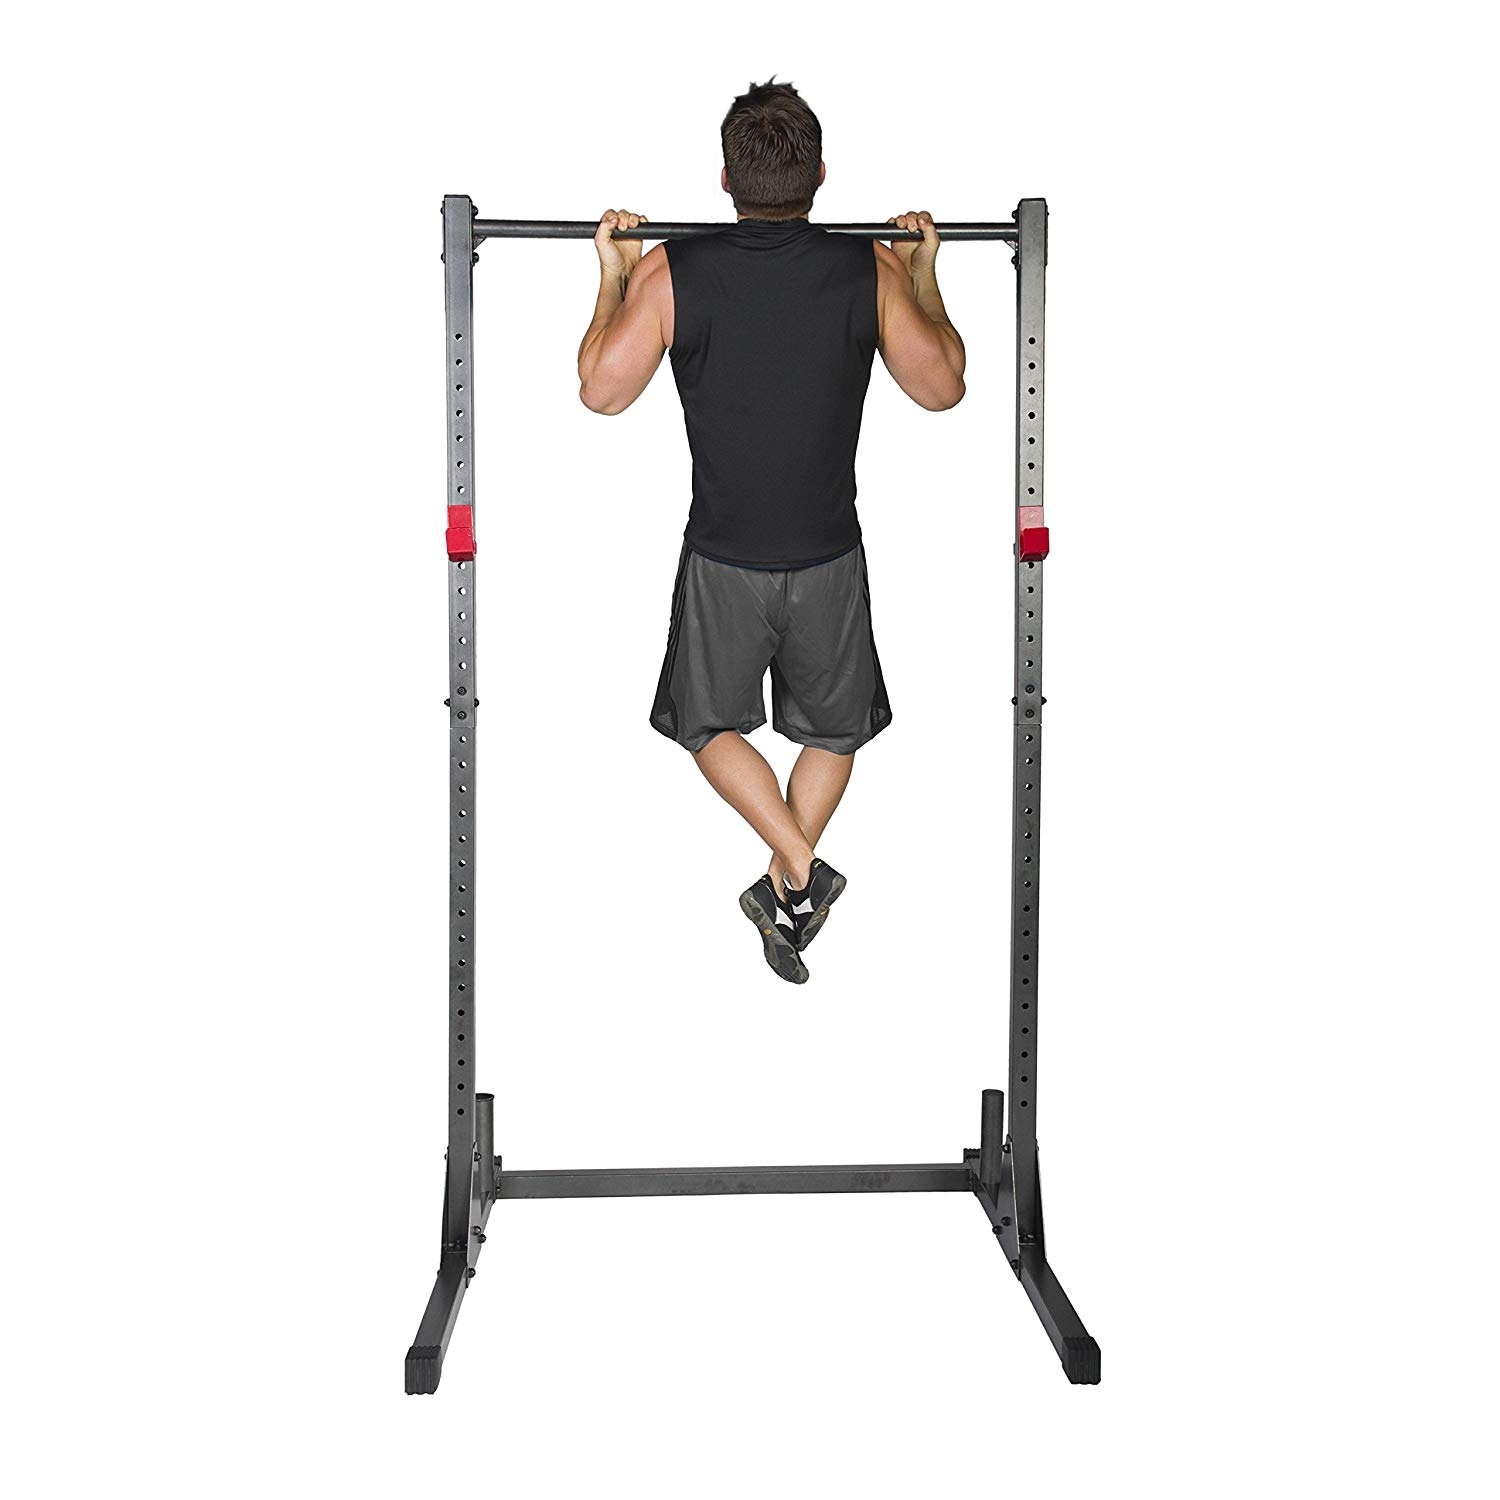 Cap Barbell Power Rack Dip attachment Best Squat Rack with Pull Up Bar 2018 Reviews Healthier Land